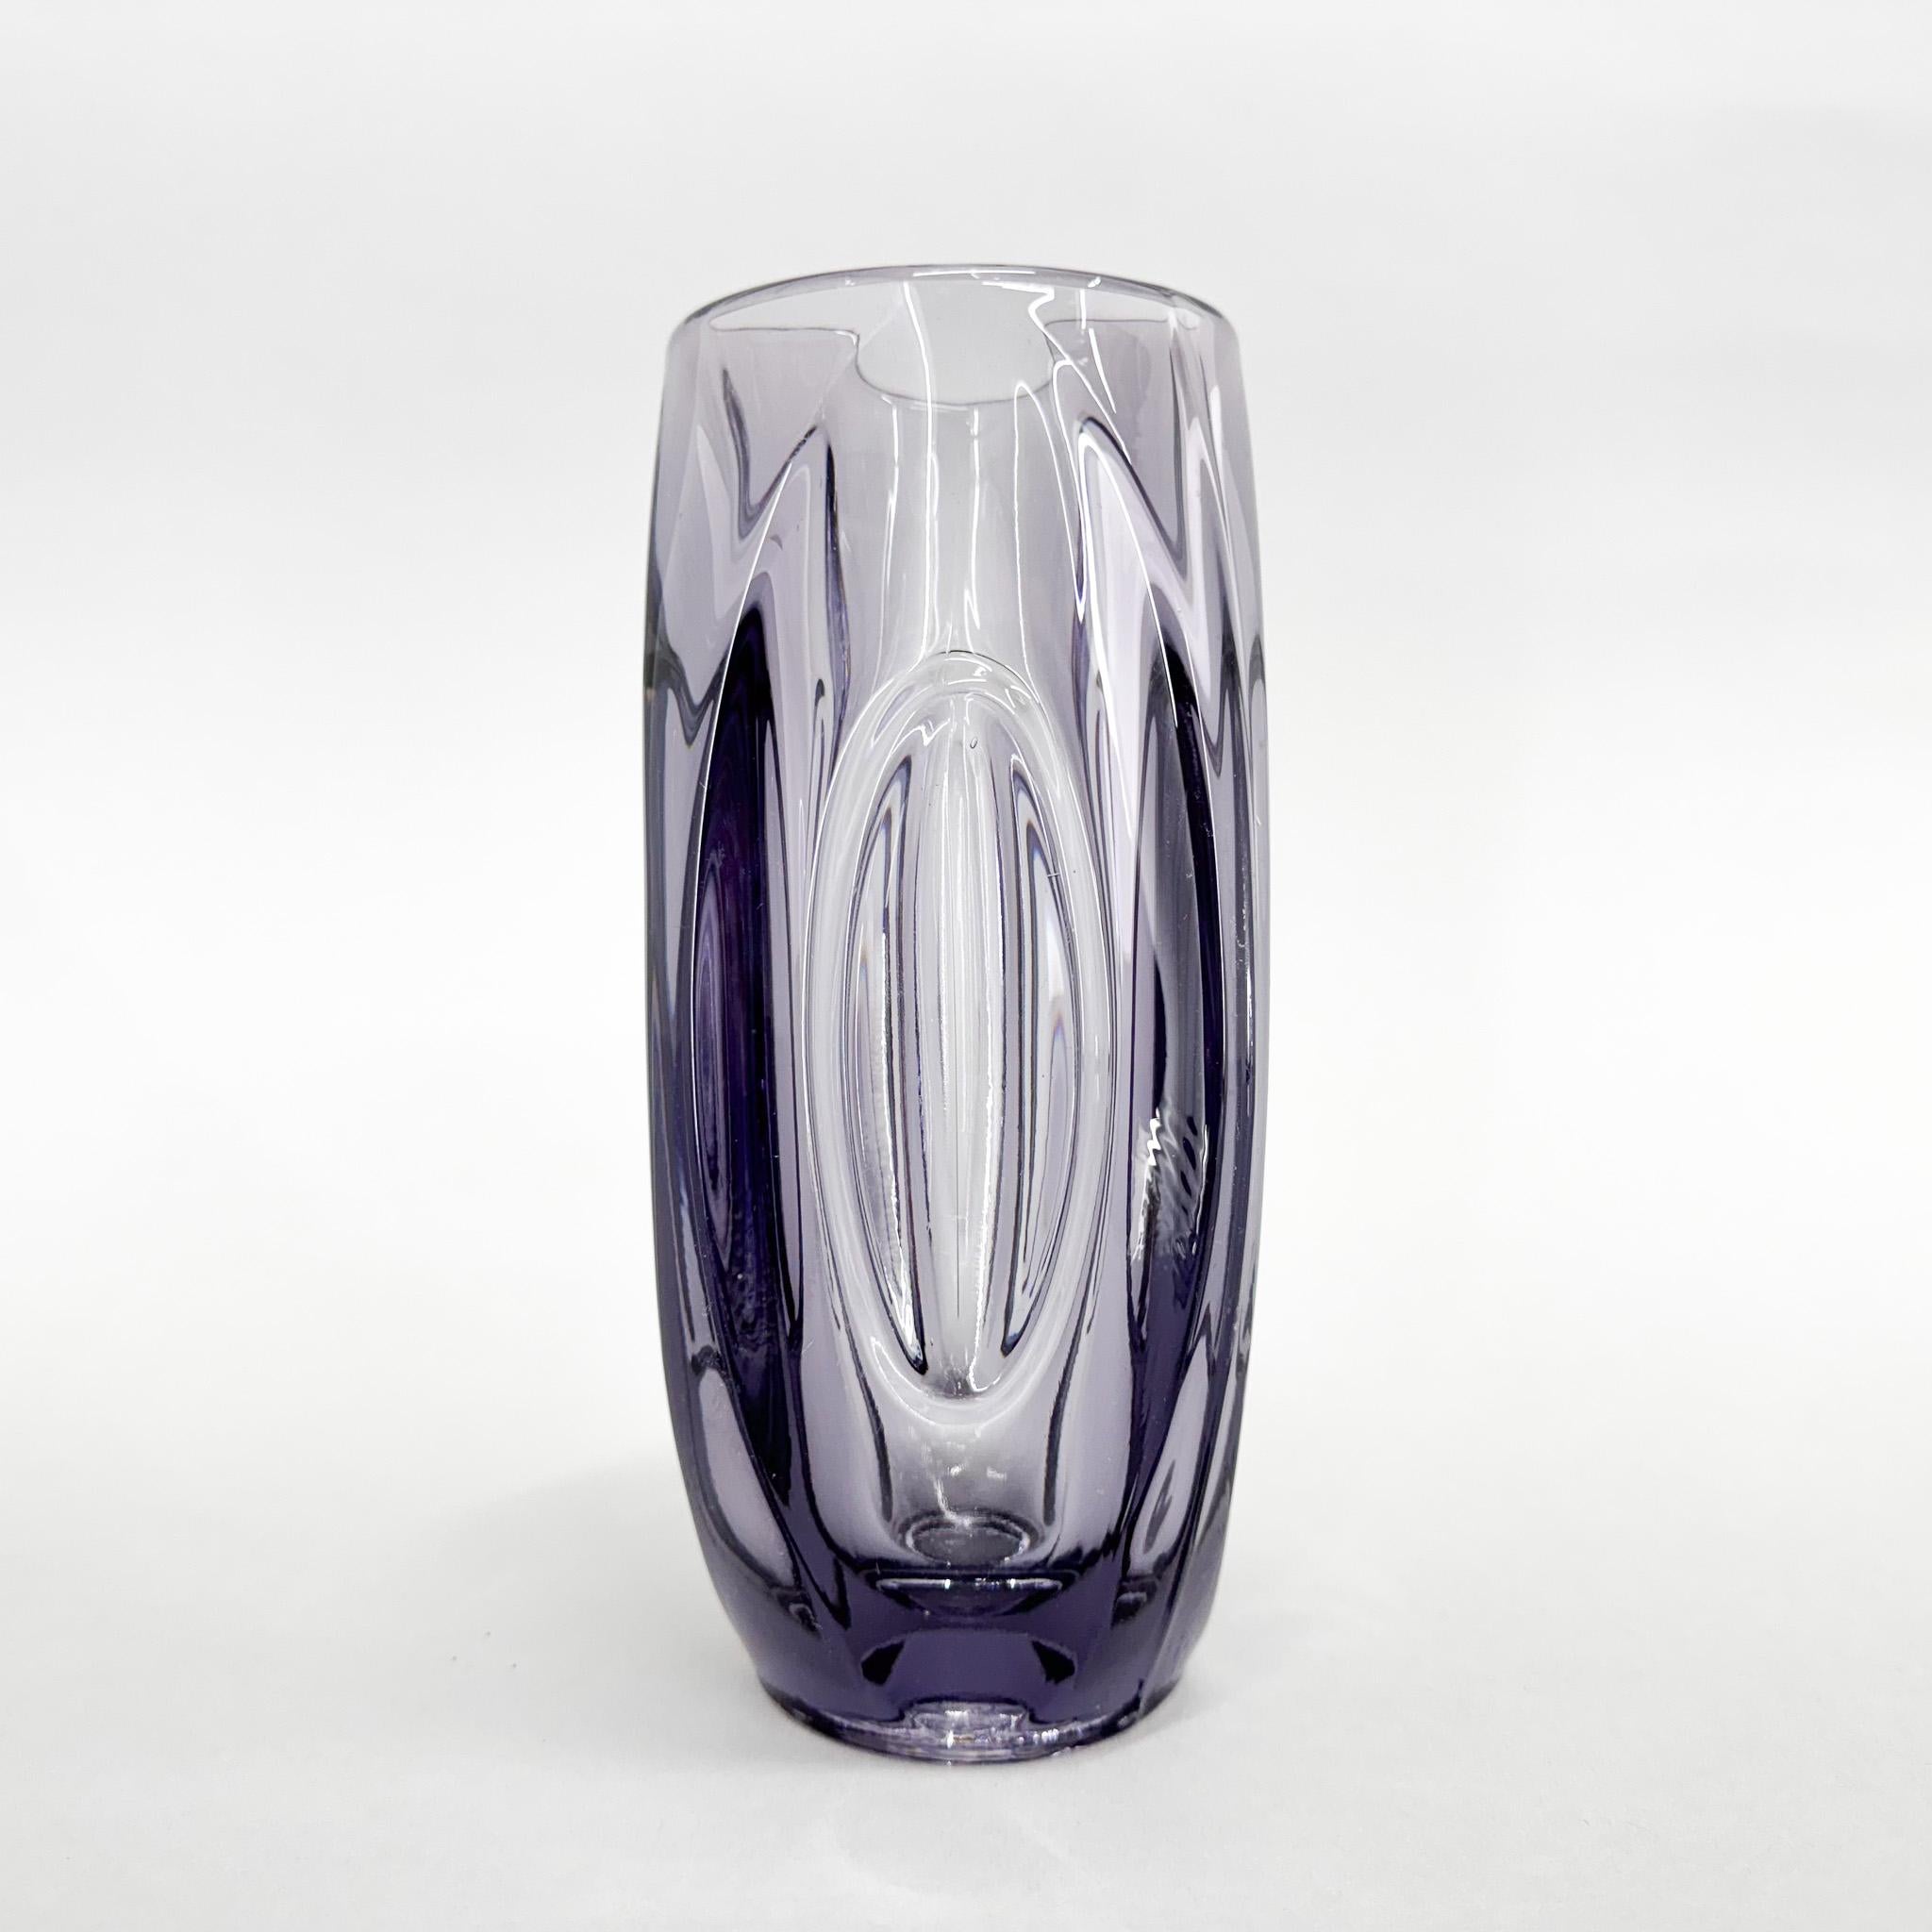 Purplish vase made of pressed glass designed by Rudolf Schrötter in circa 1955 and manufactured by Rosice Glassworks (part of the Sklo Union) in former Czechoslovakia. Very unusual in this size.